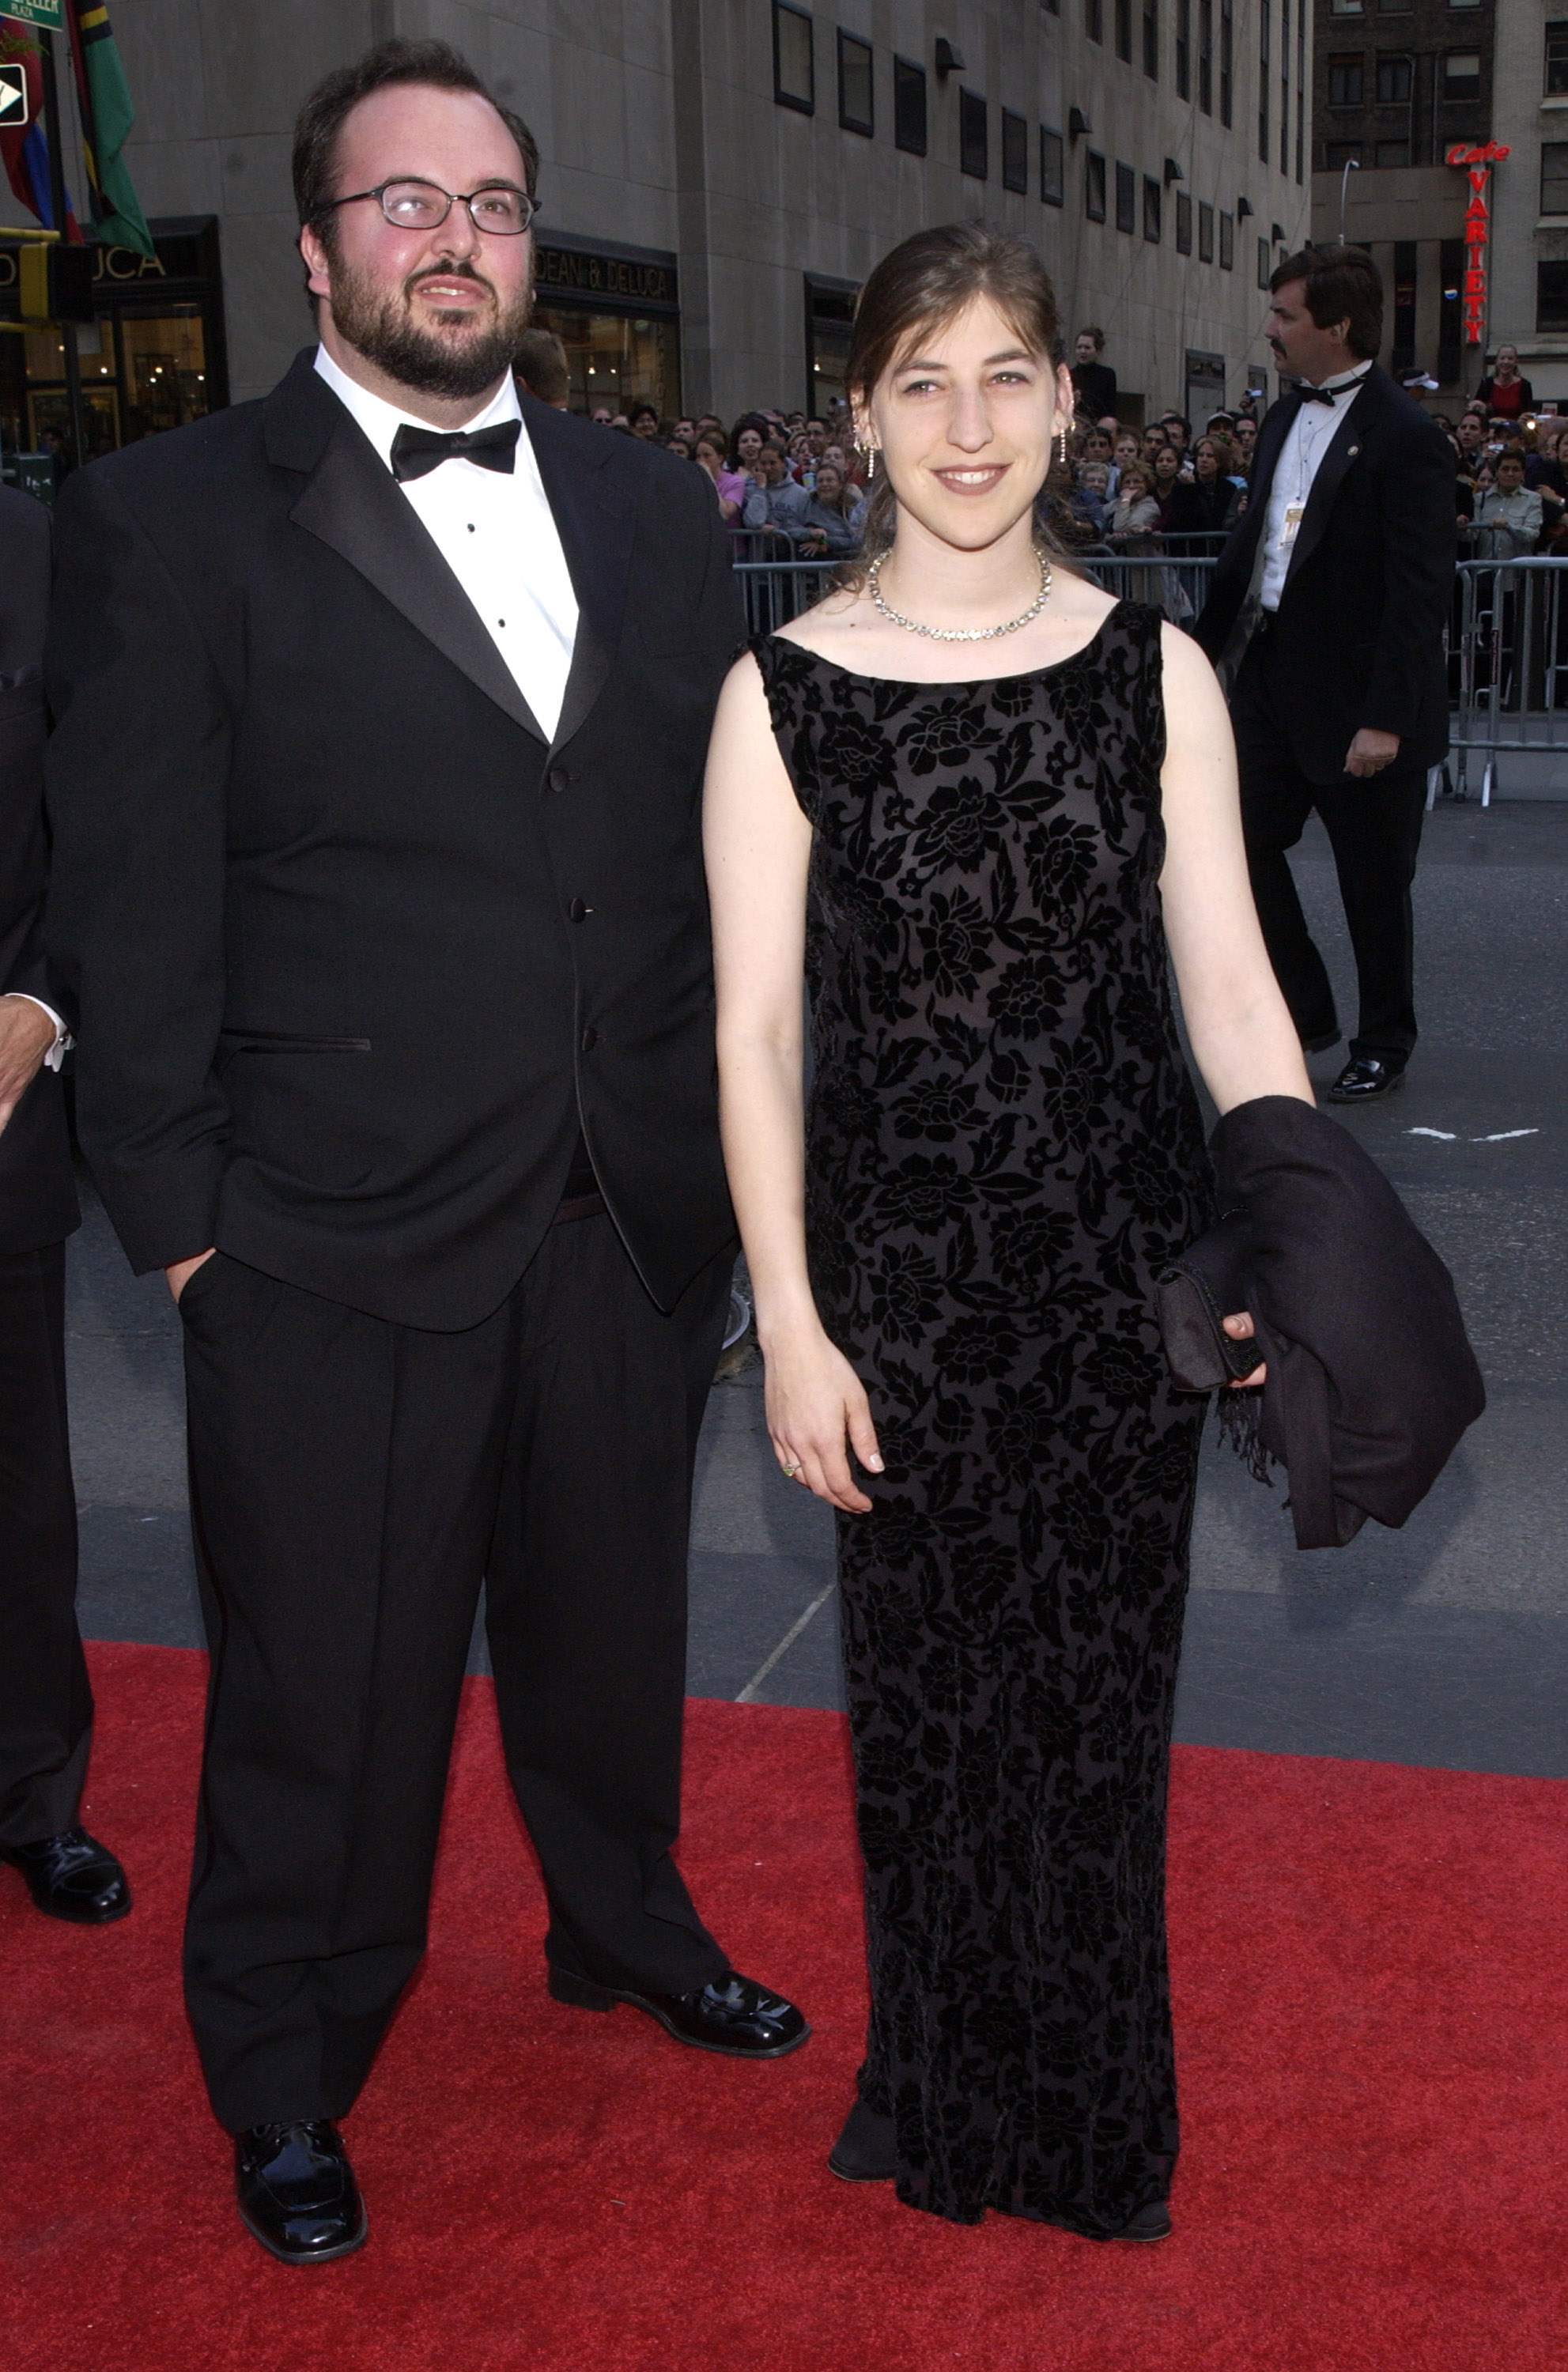 Michael Stone and Mayim Bialik during NBC's 75th Anniversary in New York City on May 6, 2002 | Source: Getty Images